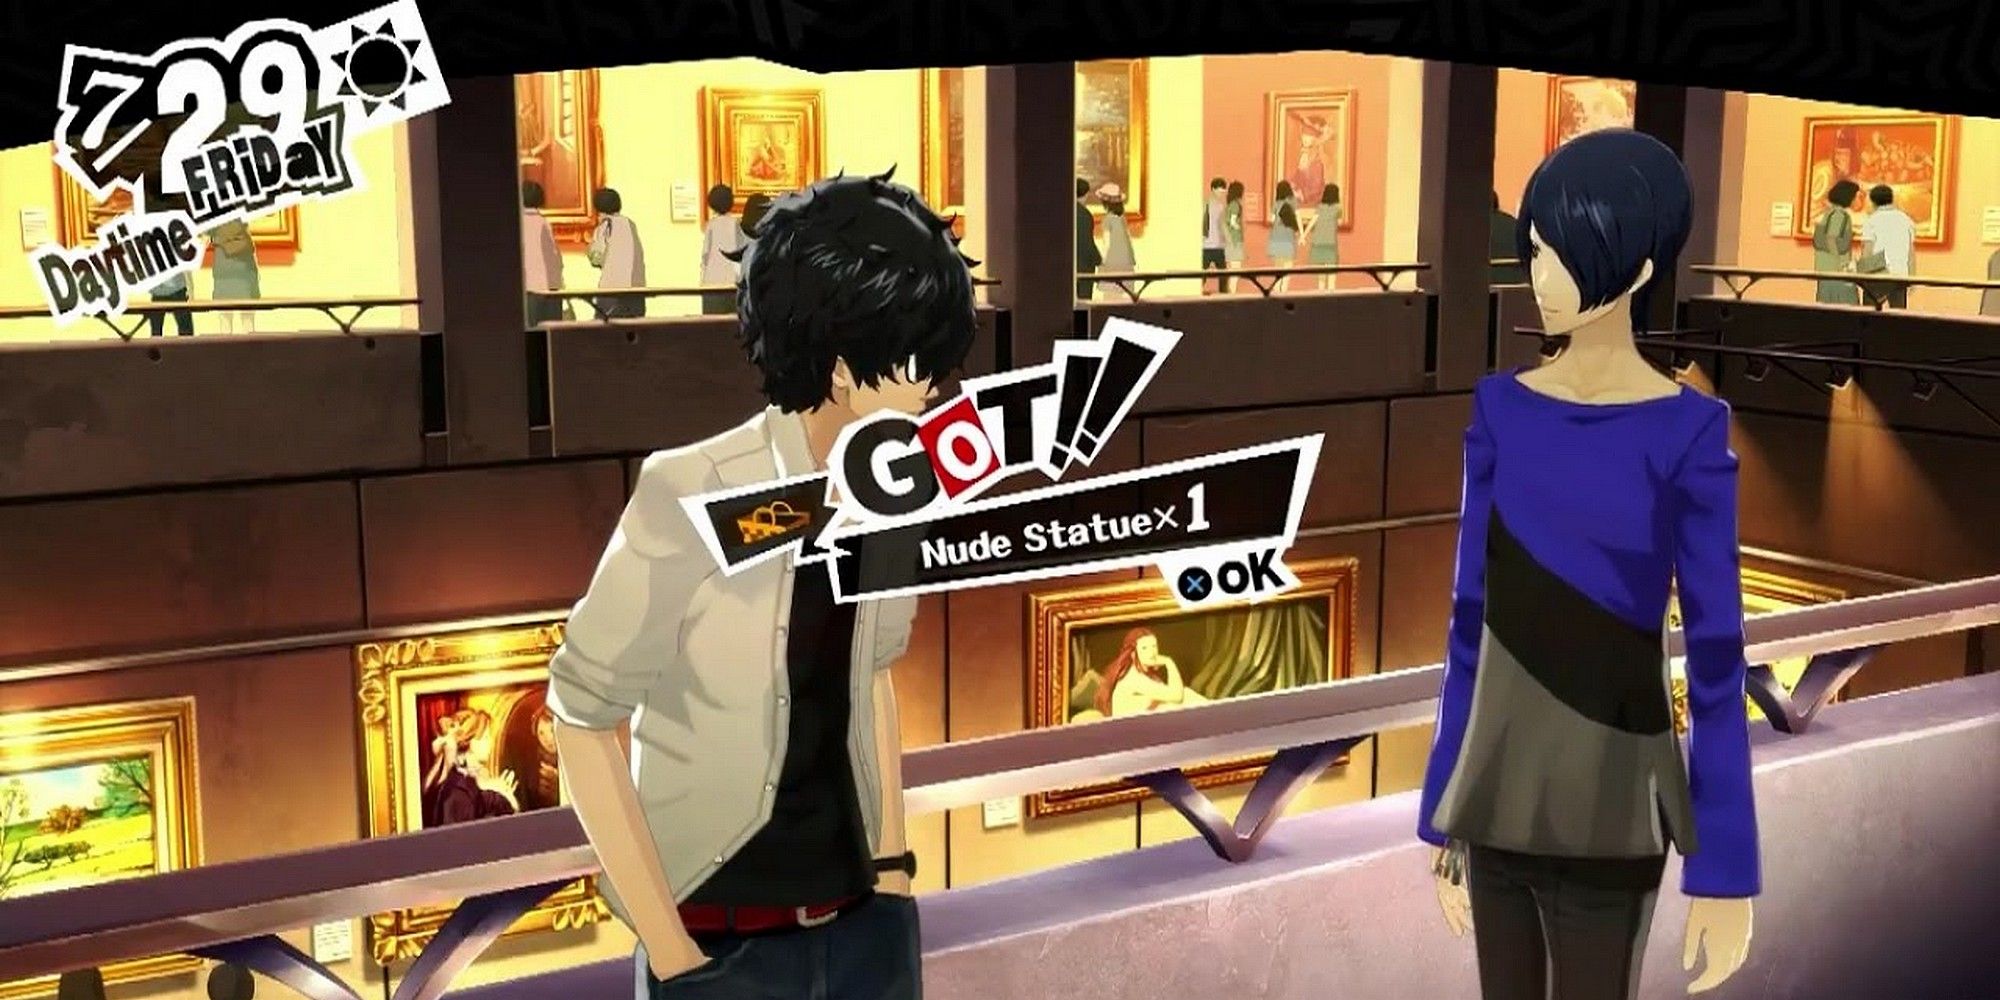 Yusuke and Joker hanging out to level confidant rank in Persona 5